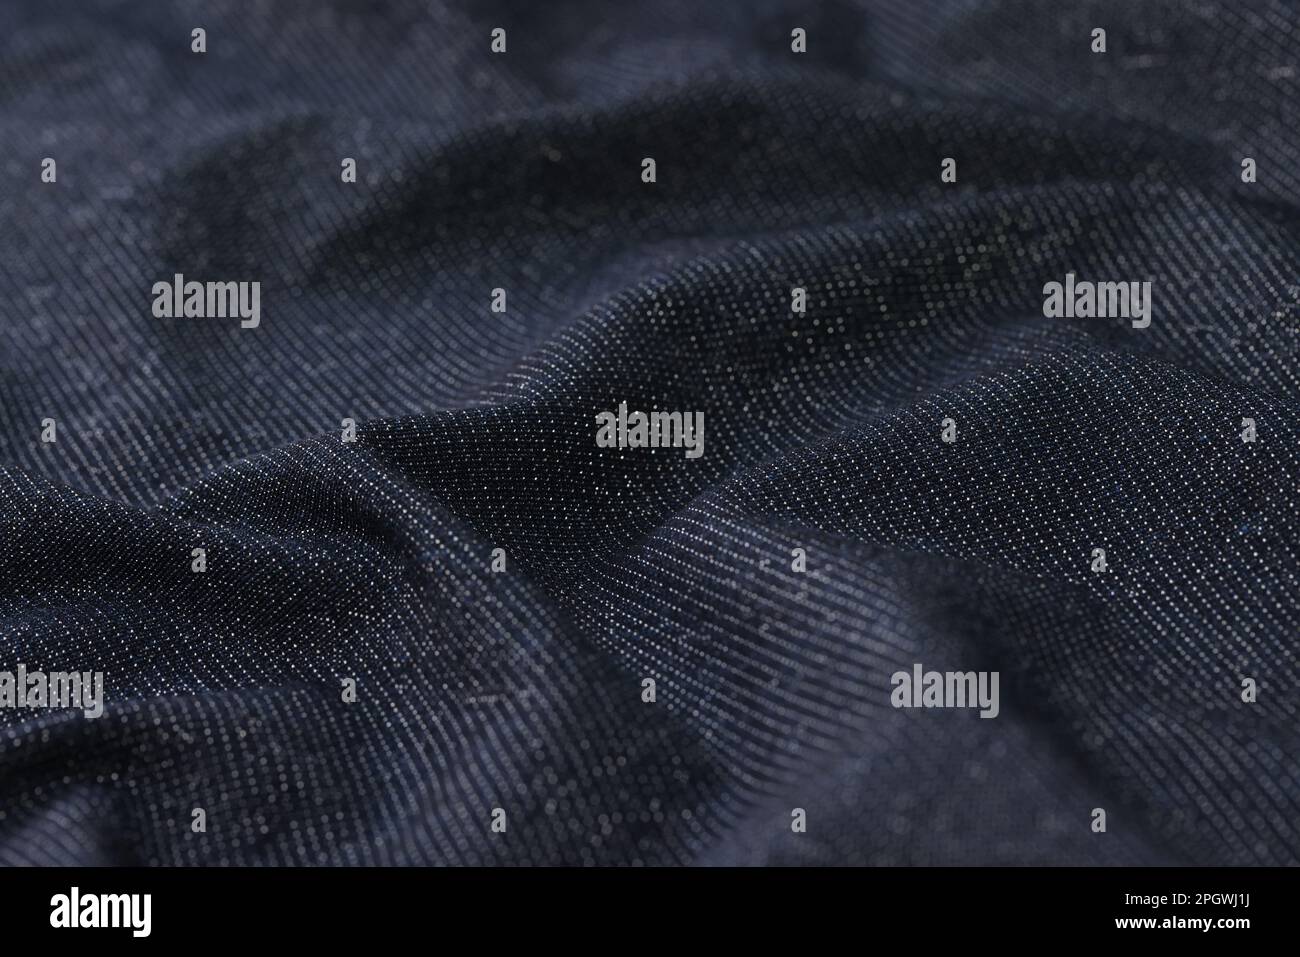 Crumpled dark grey dense fabric for clothes sewing Stock Photo